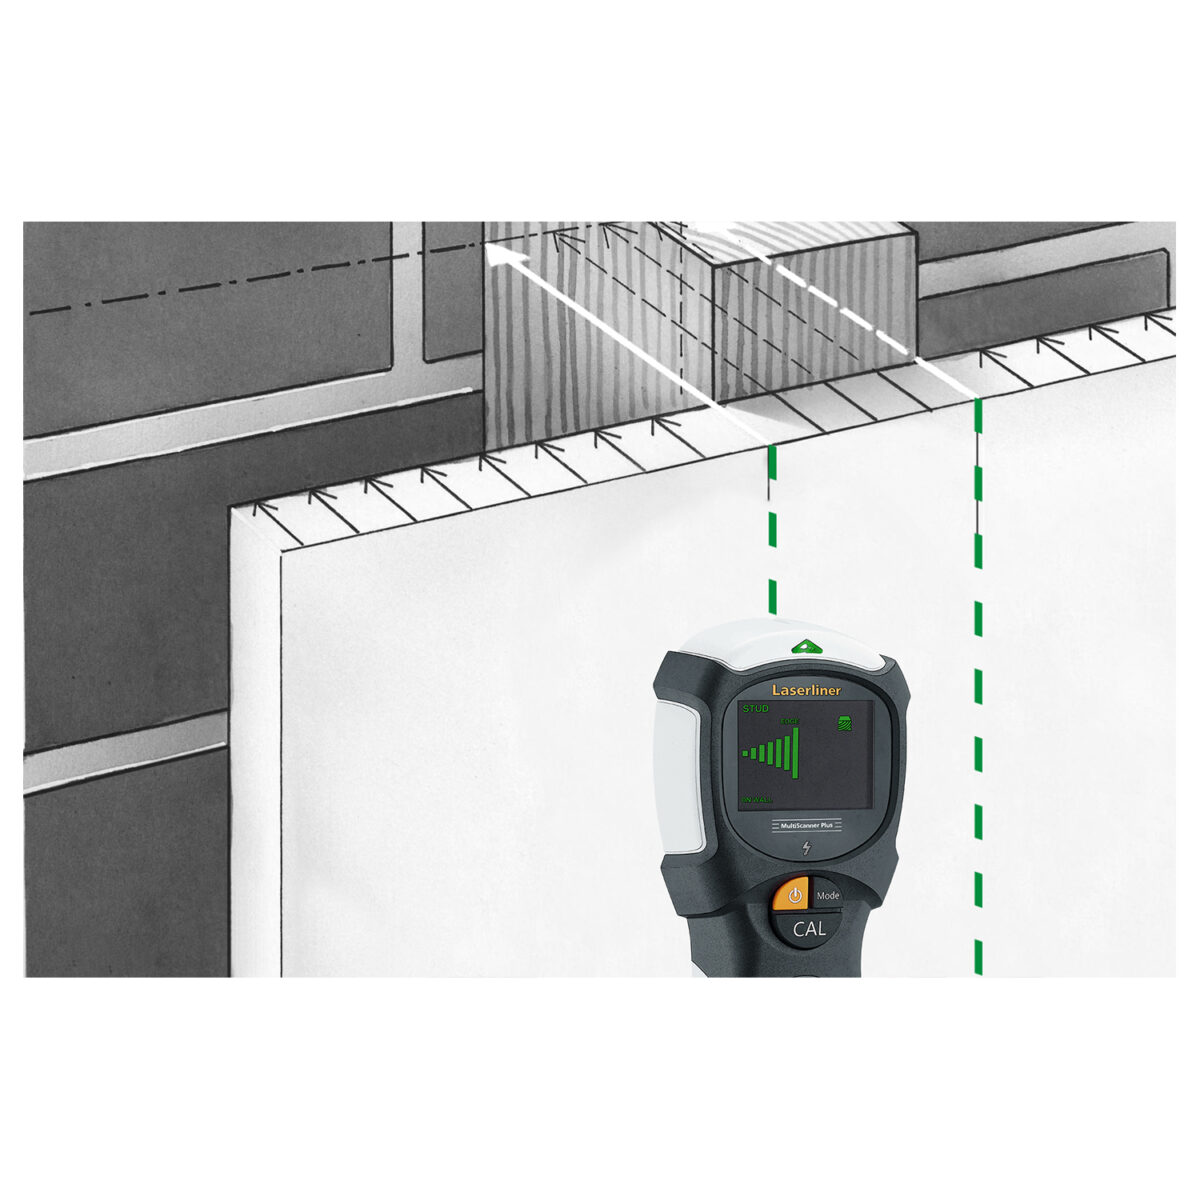 Laserliner Multiscanner Plus - locate drywall objects